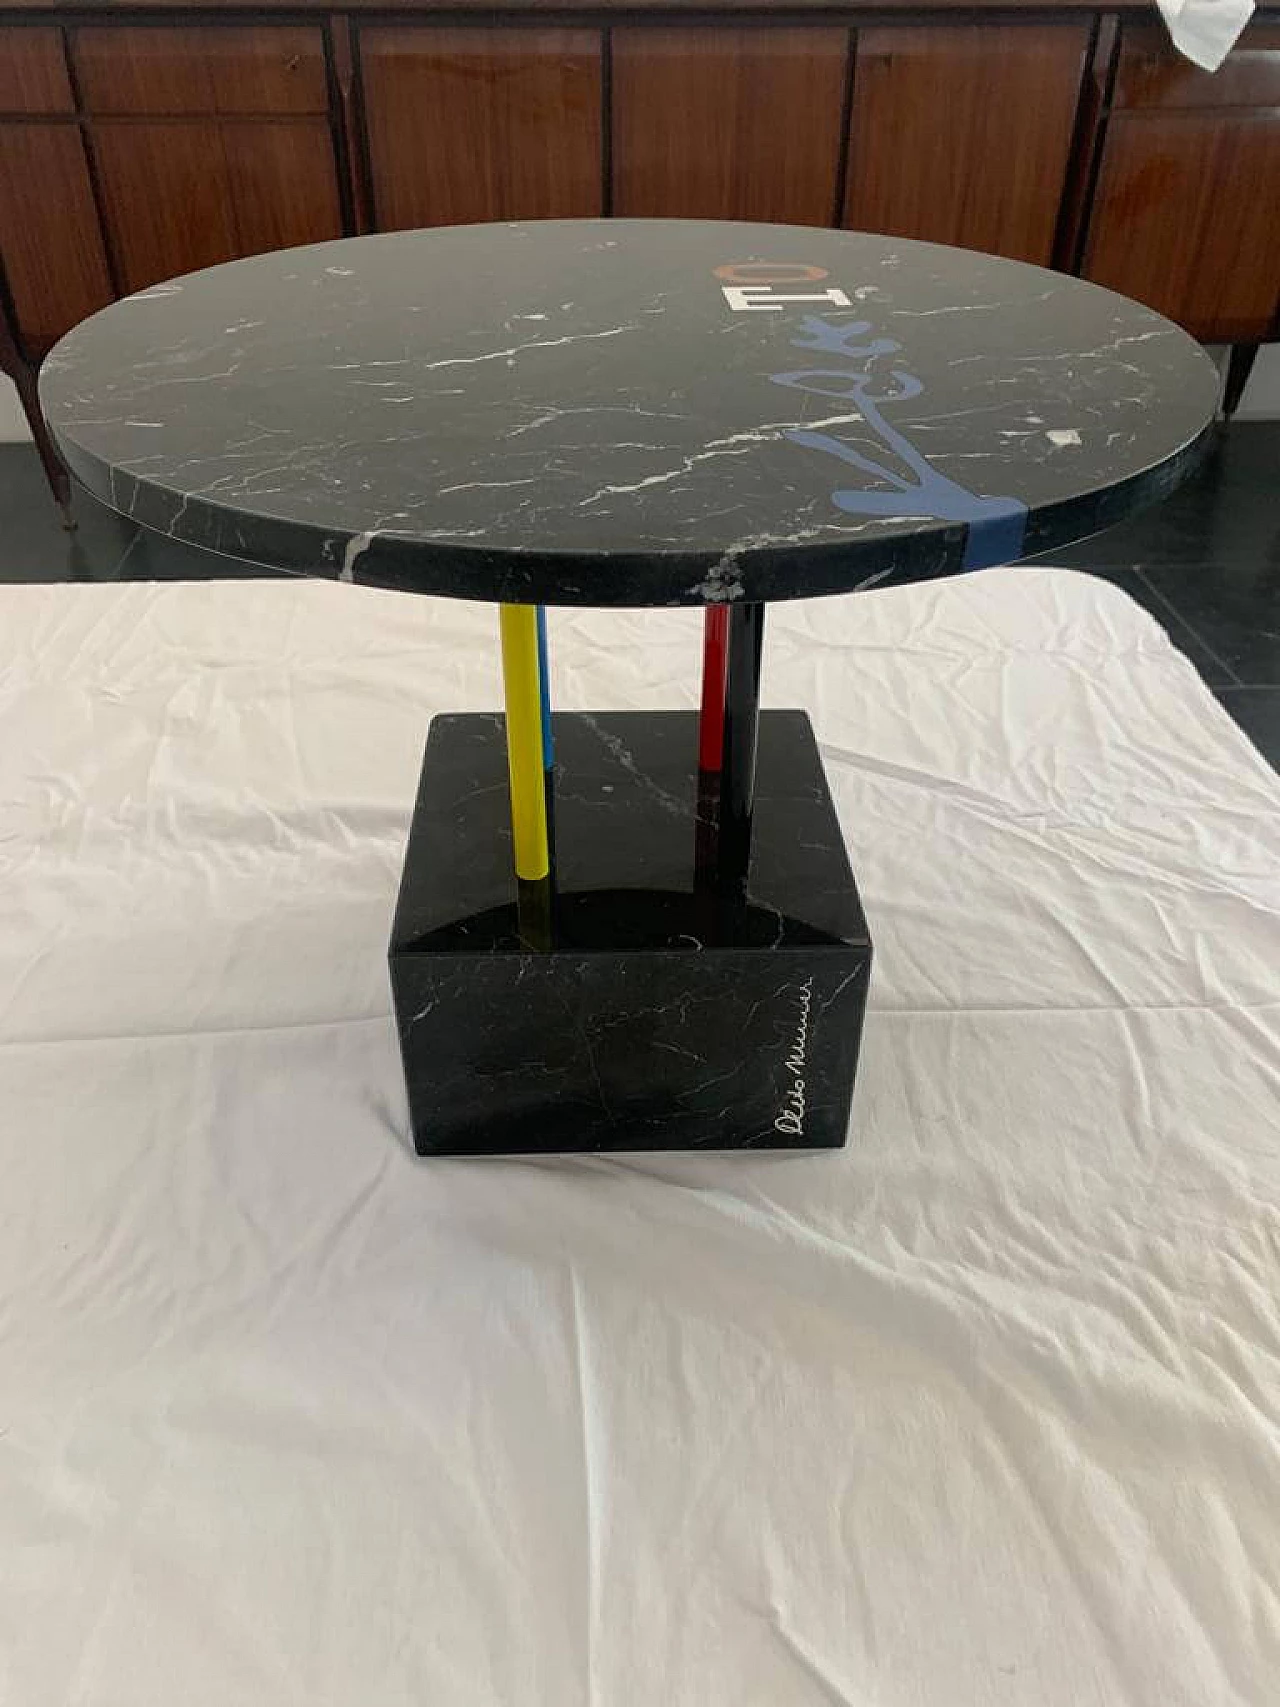 Kleeto coffee table by Cleto Munari, unique piece with inlaid marble 1312104